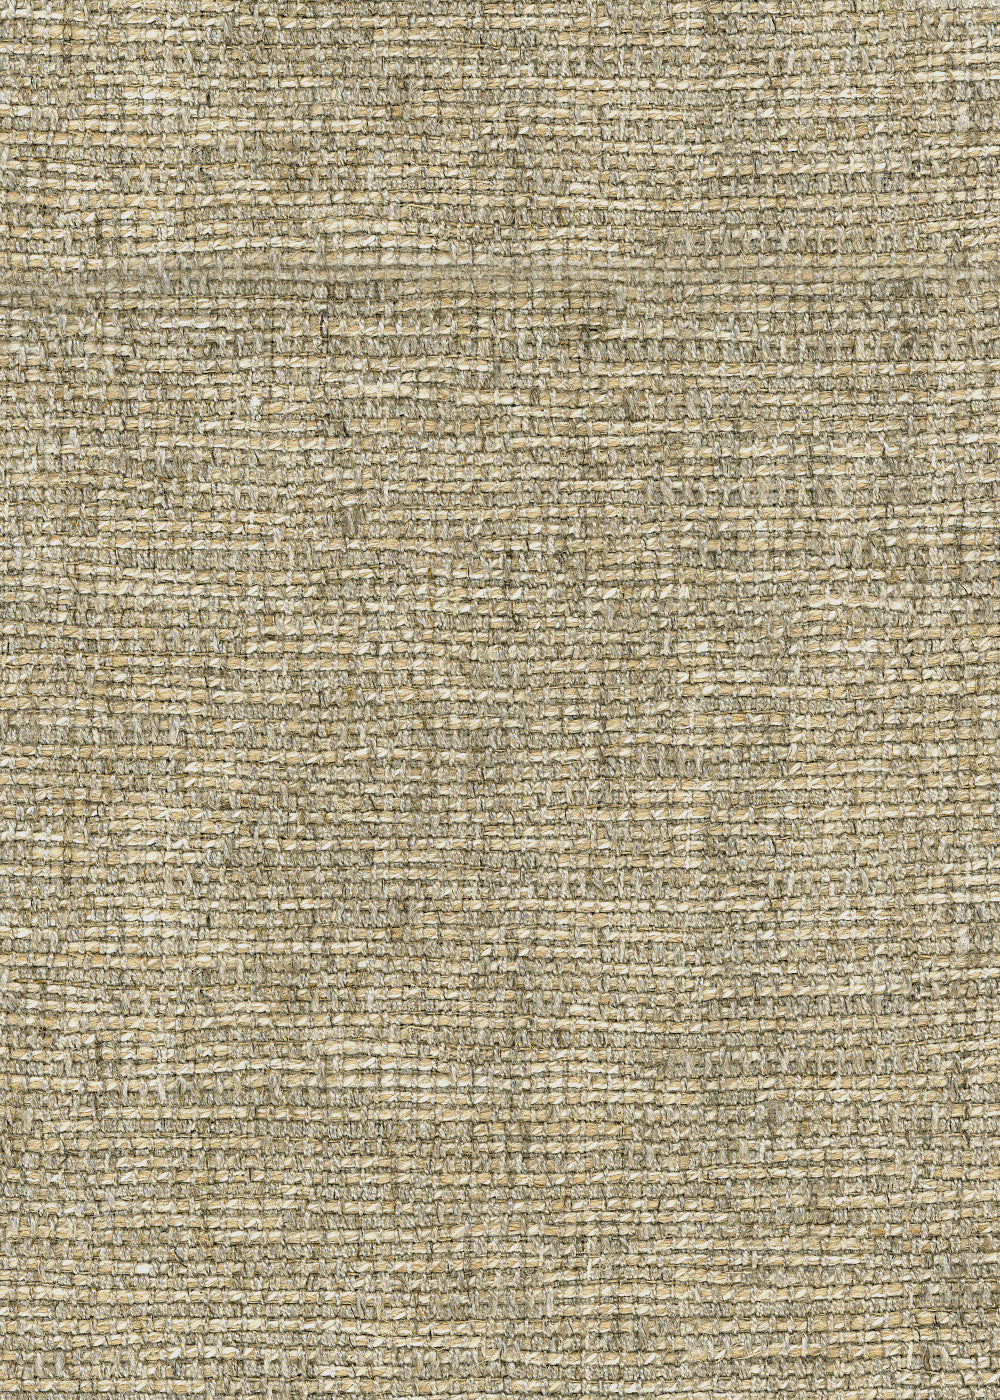 close up of a woven upholstery fabric made with jute, natural color